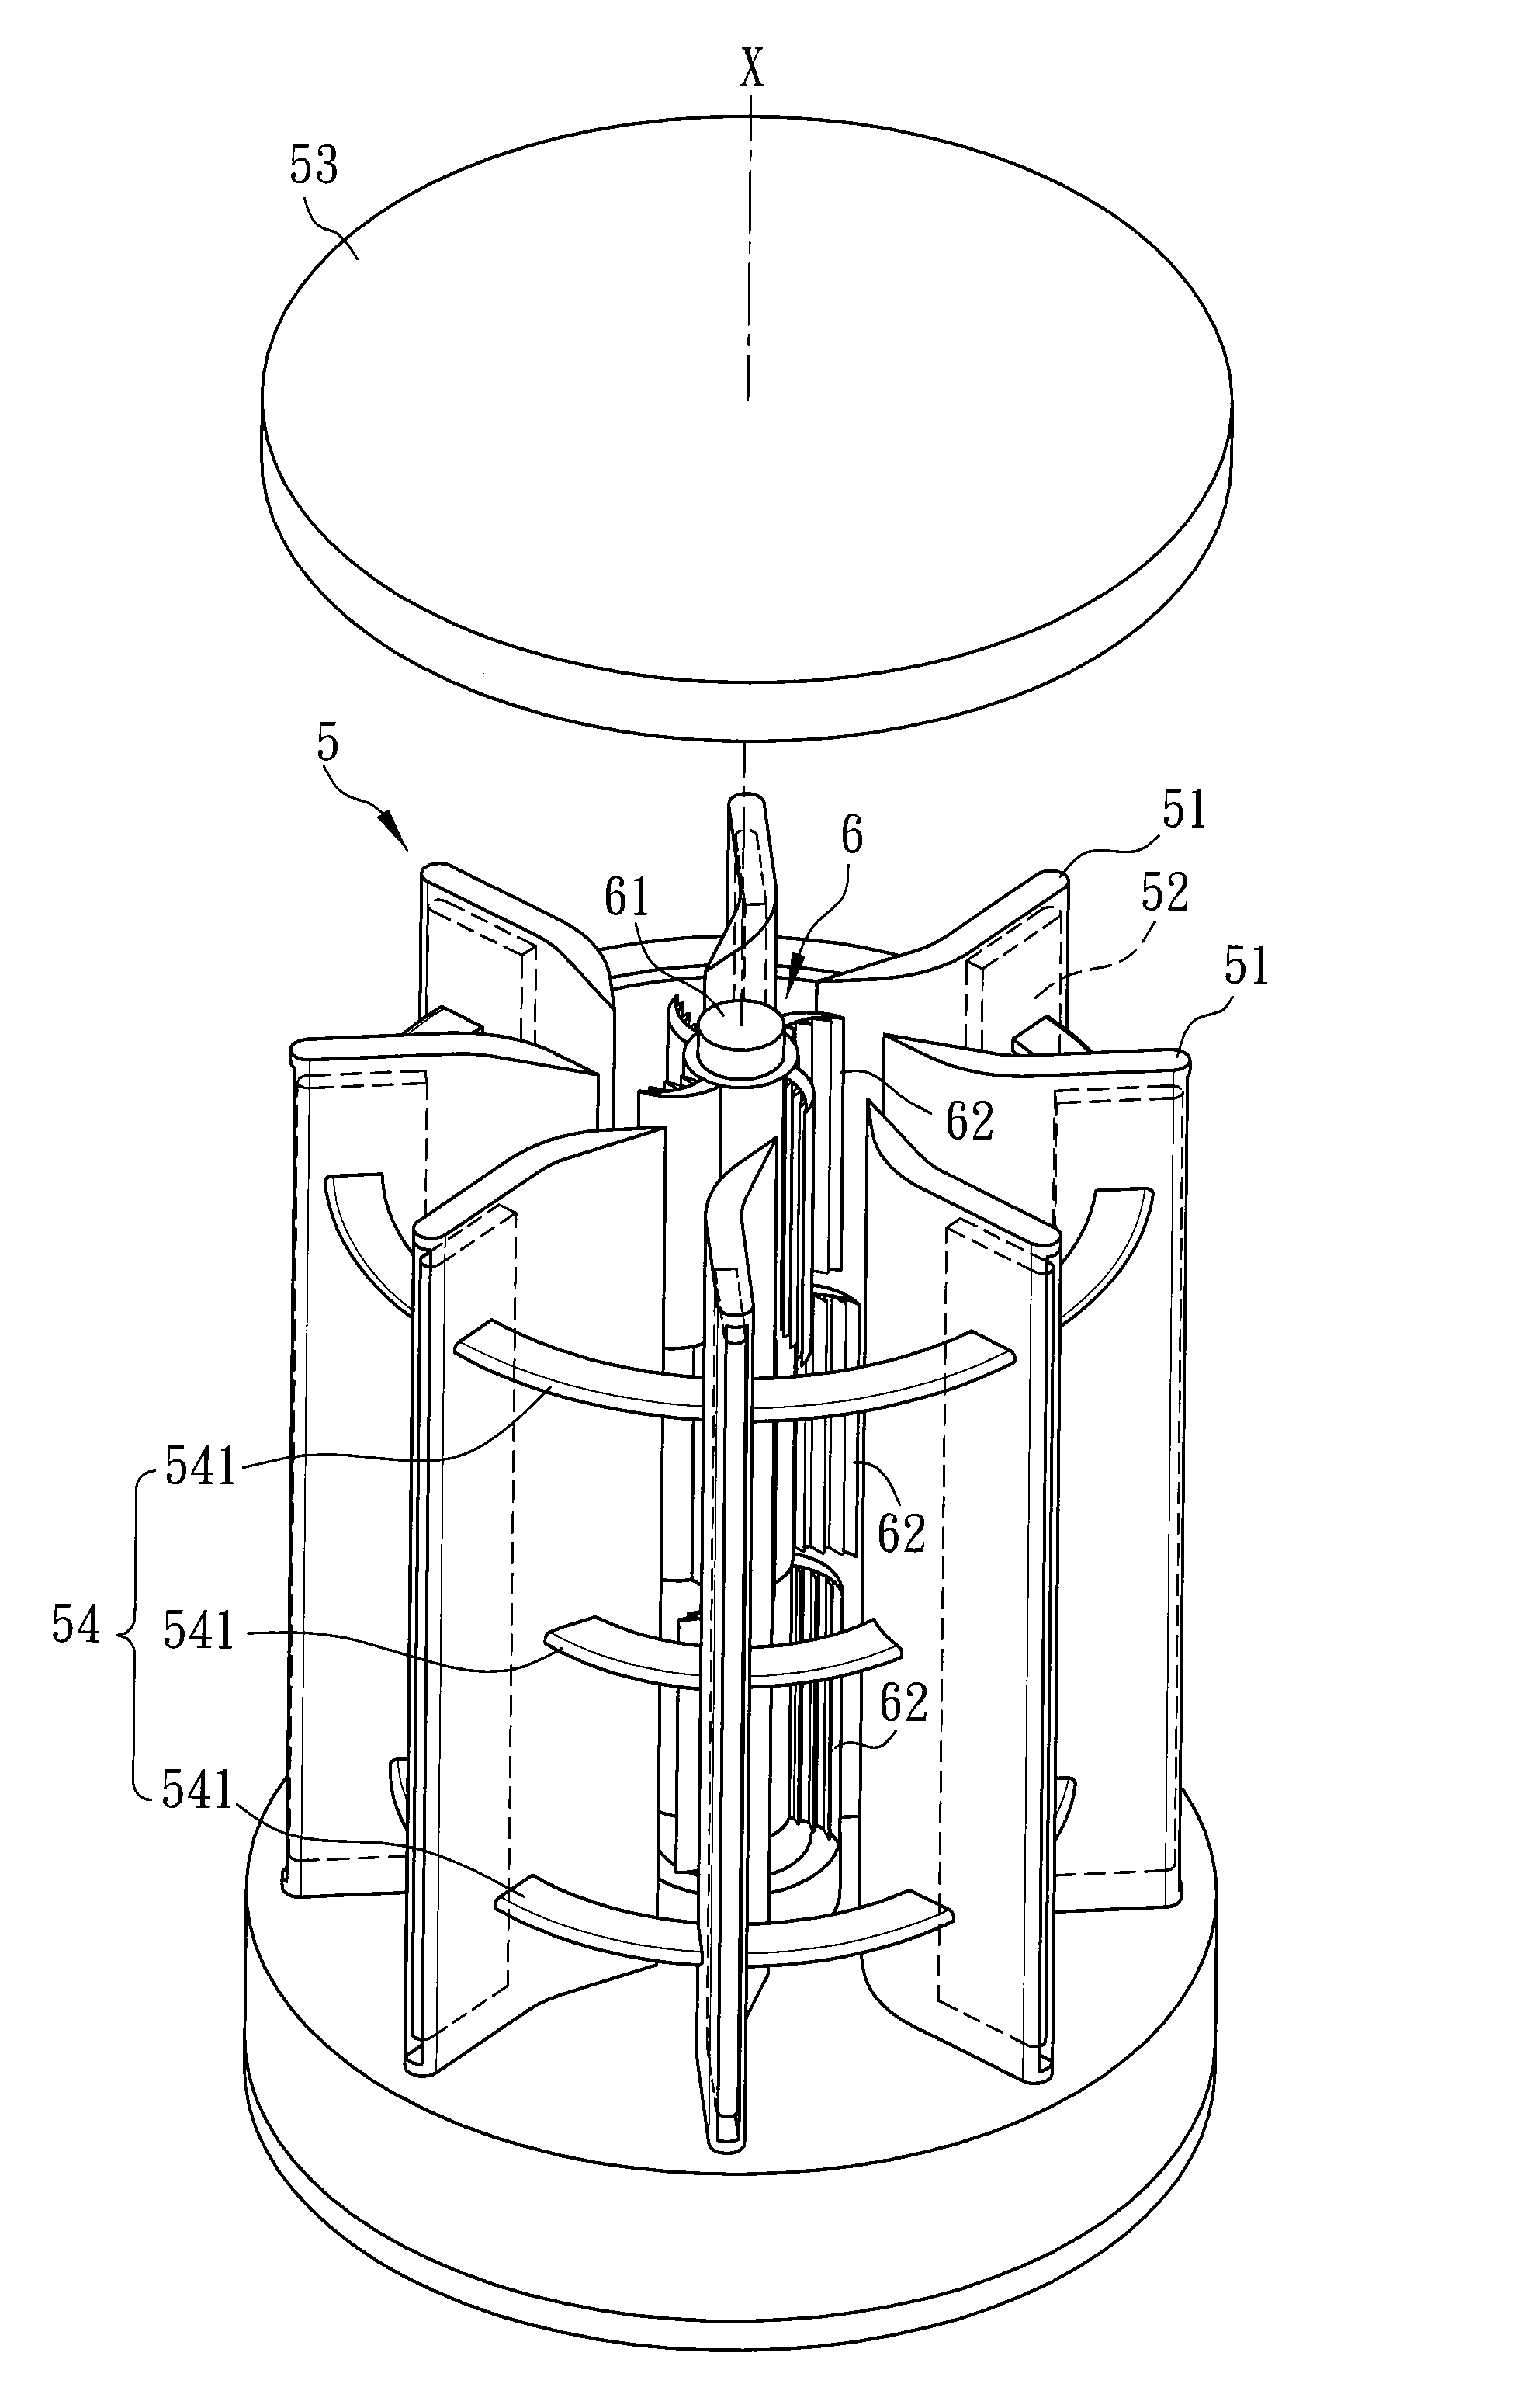 Apparatus for generating electric power using wind energy